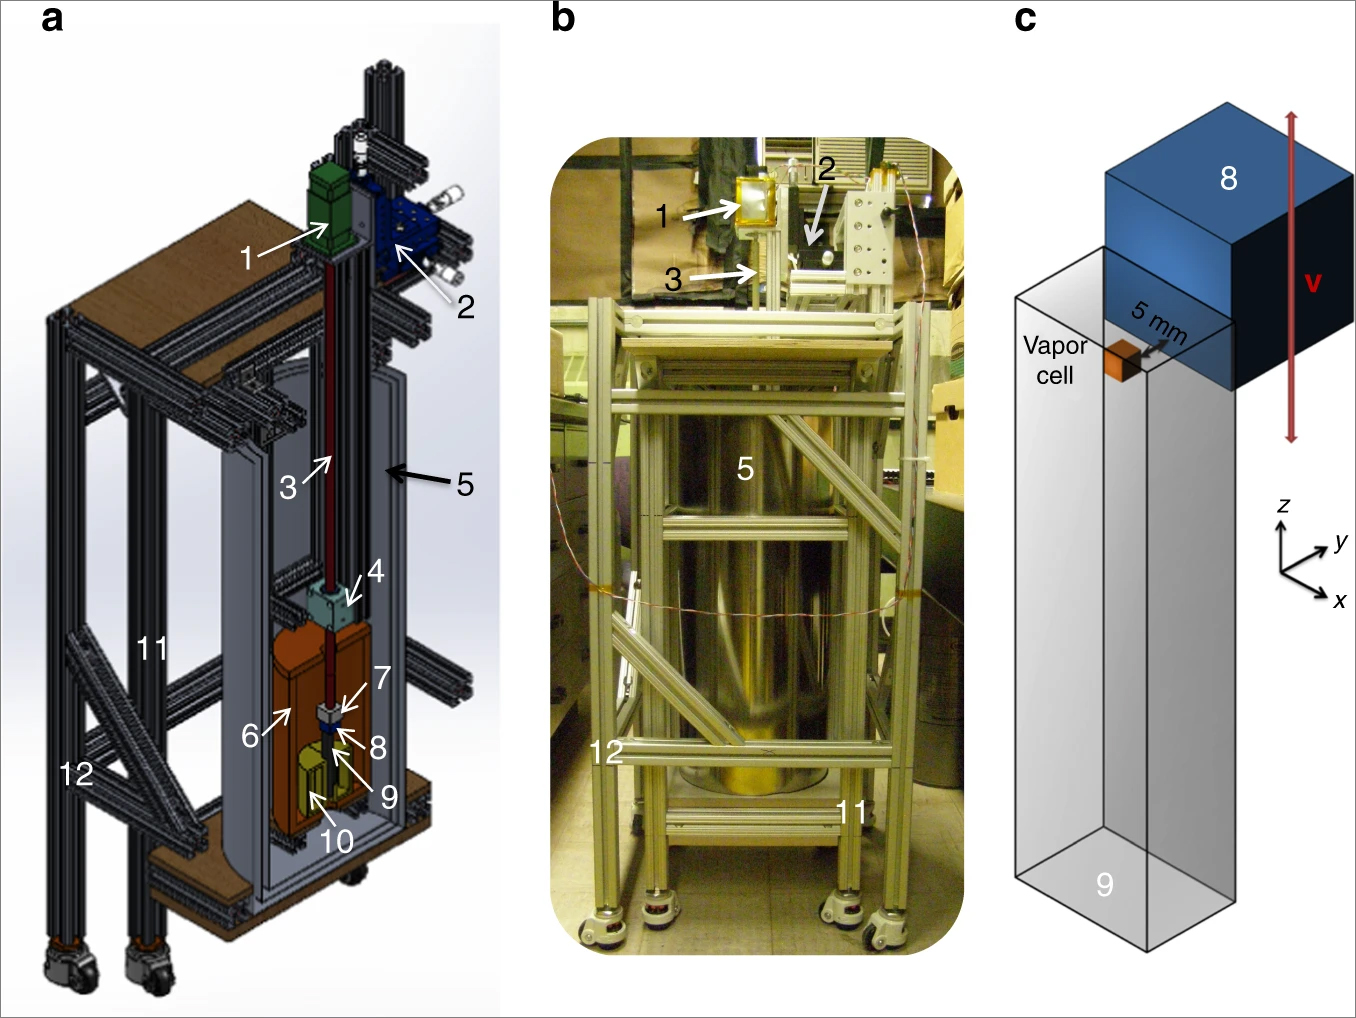 The experimental setup. (a) The setup to probe the exotic interaction. (b) A photo of the actual setup. (c) A schematic of the configuration of the atomic magnetometer and the solid-state mass.